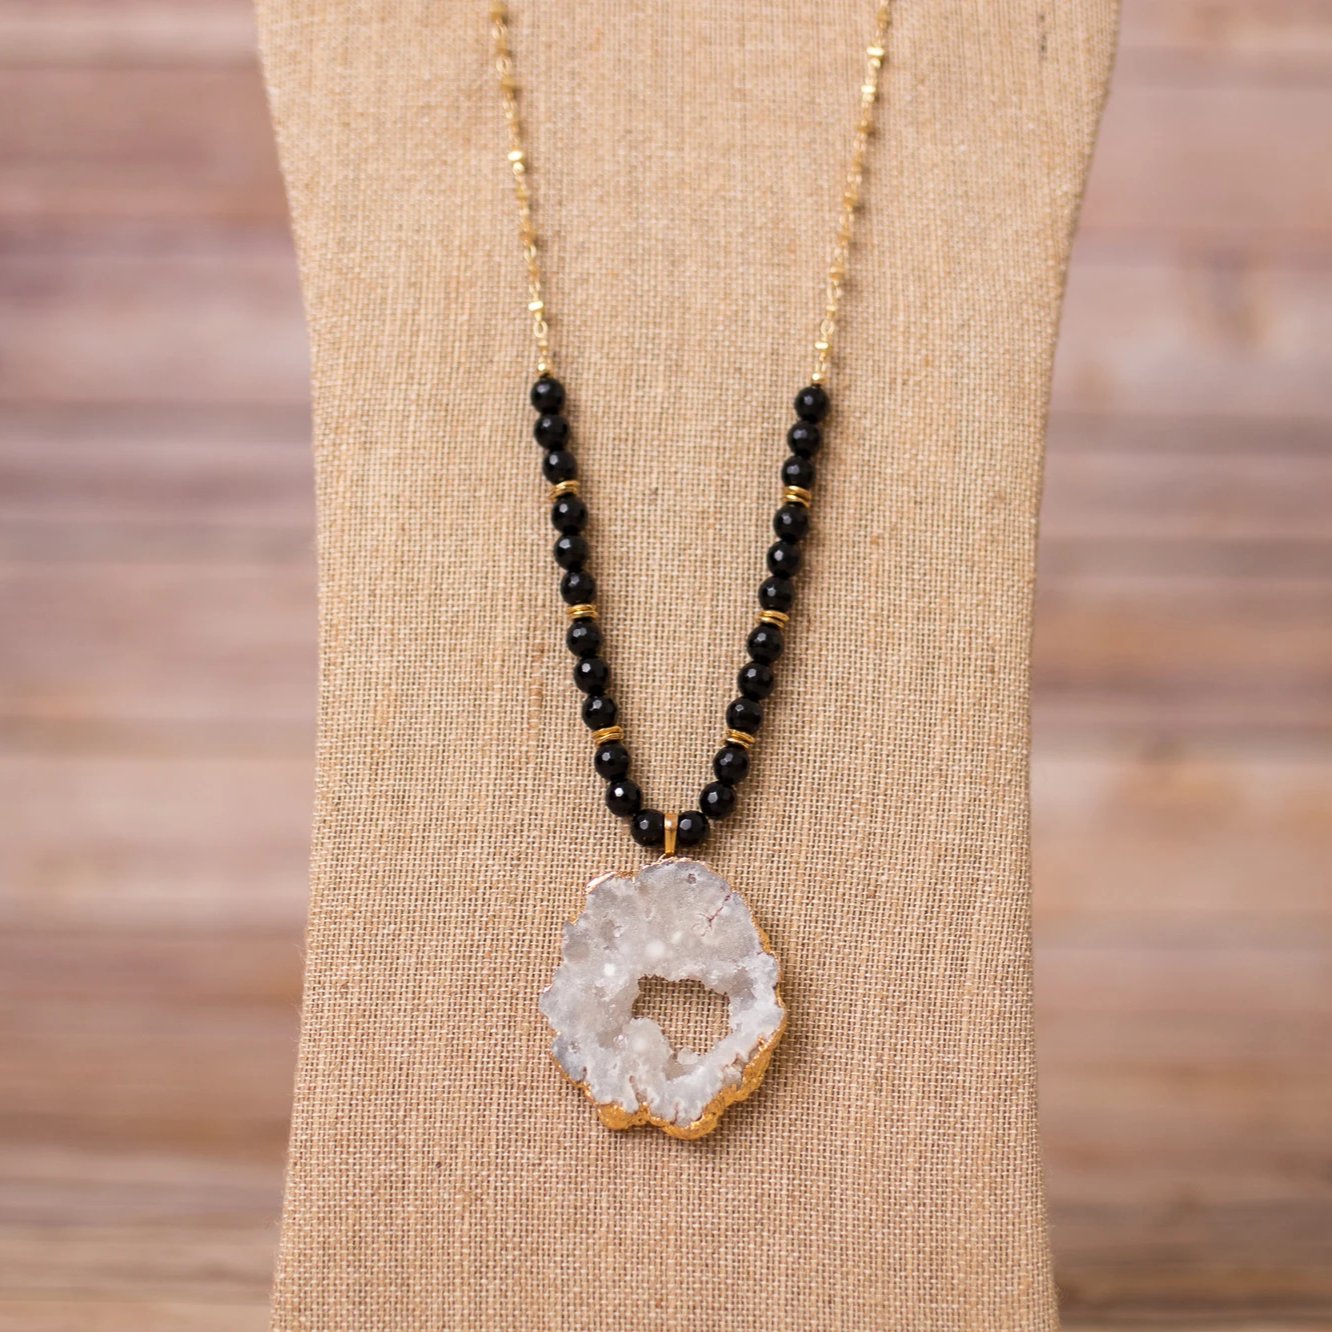 Beaded Necklace with Large Druzy Pendant